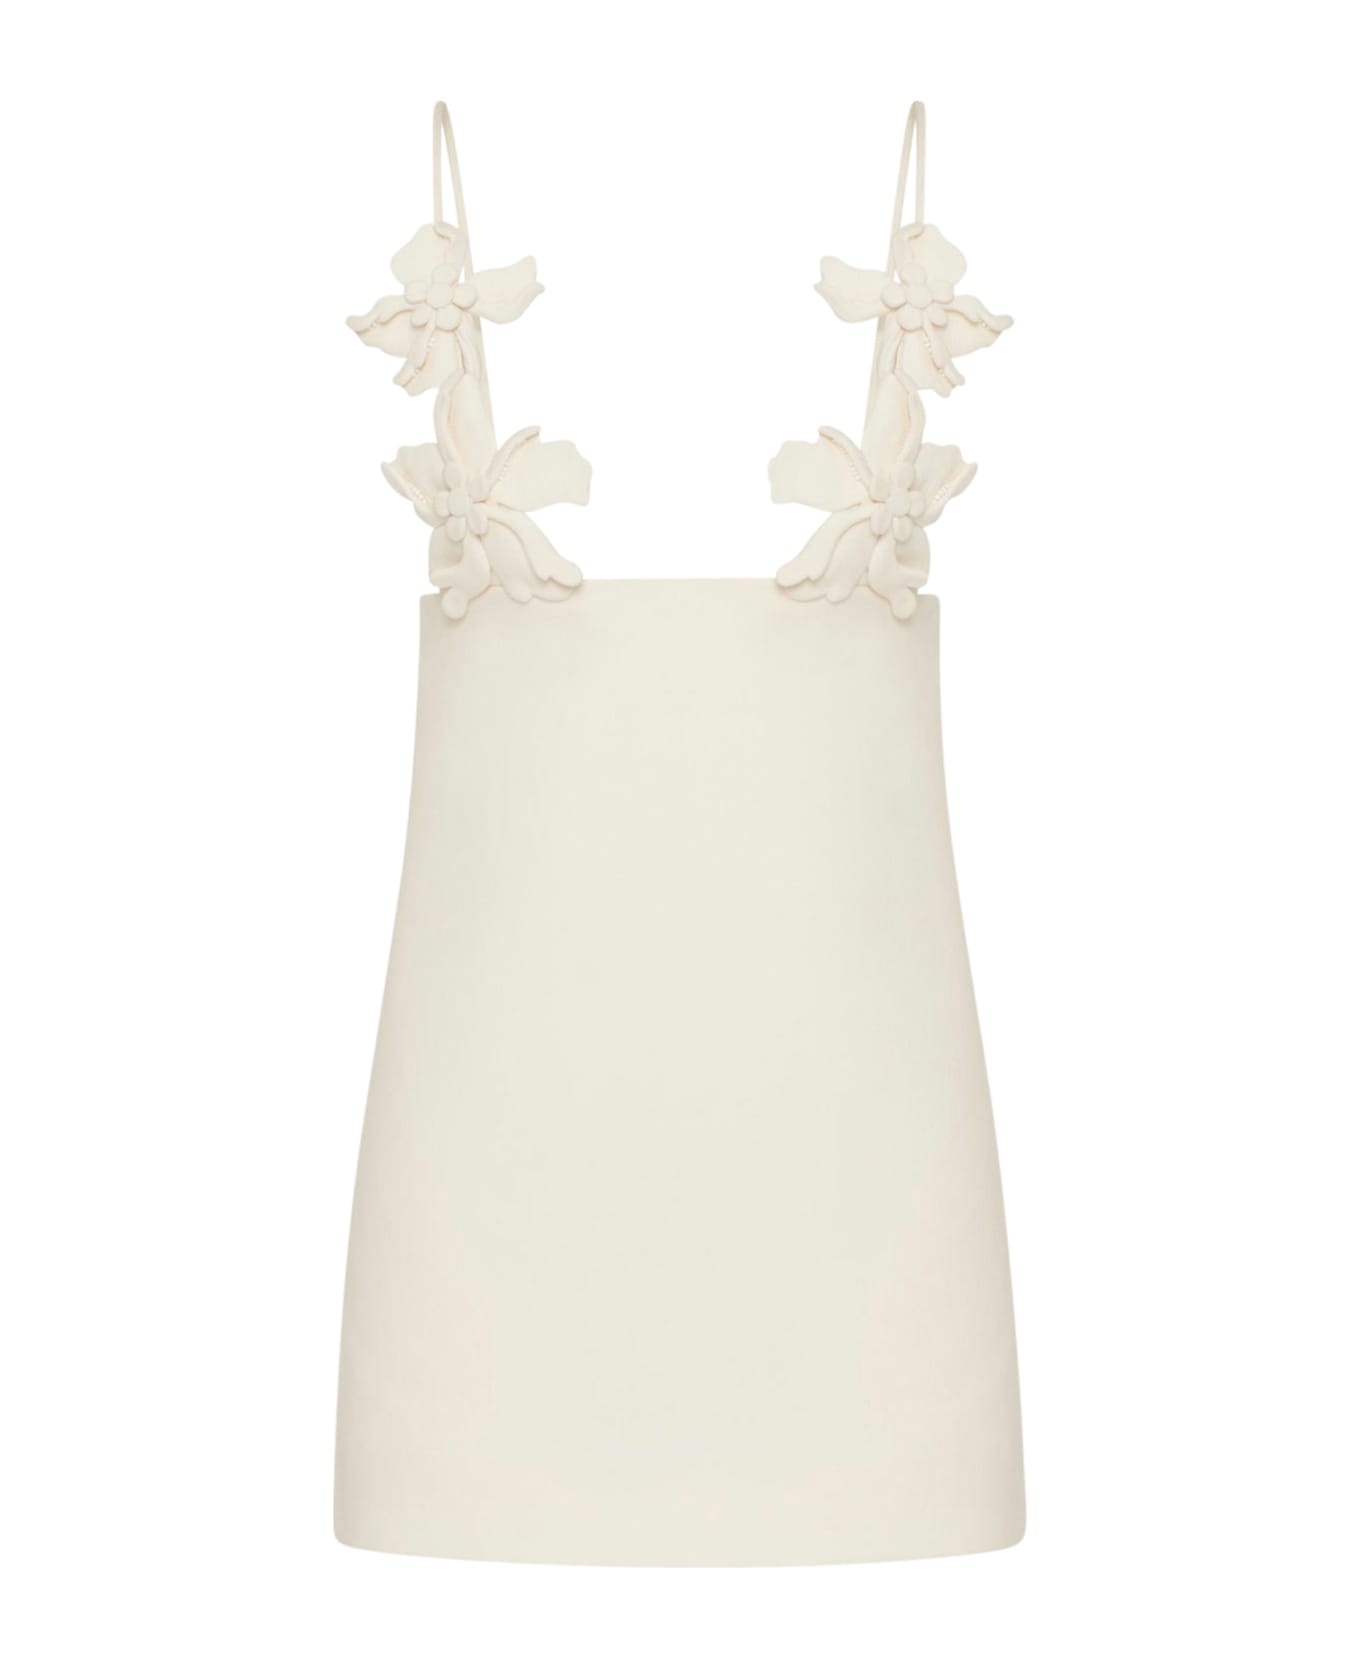 Valentino Garavani Dress - Embroidered Embroideries Crepe Couture - Ivory